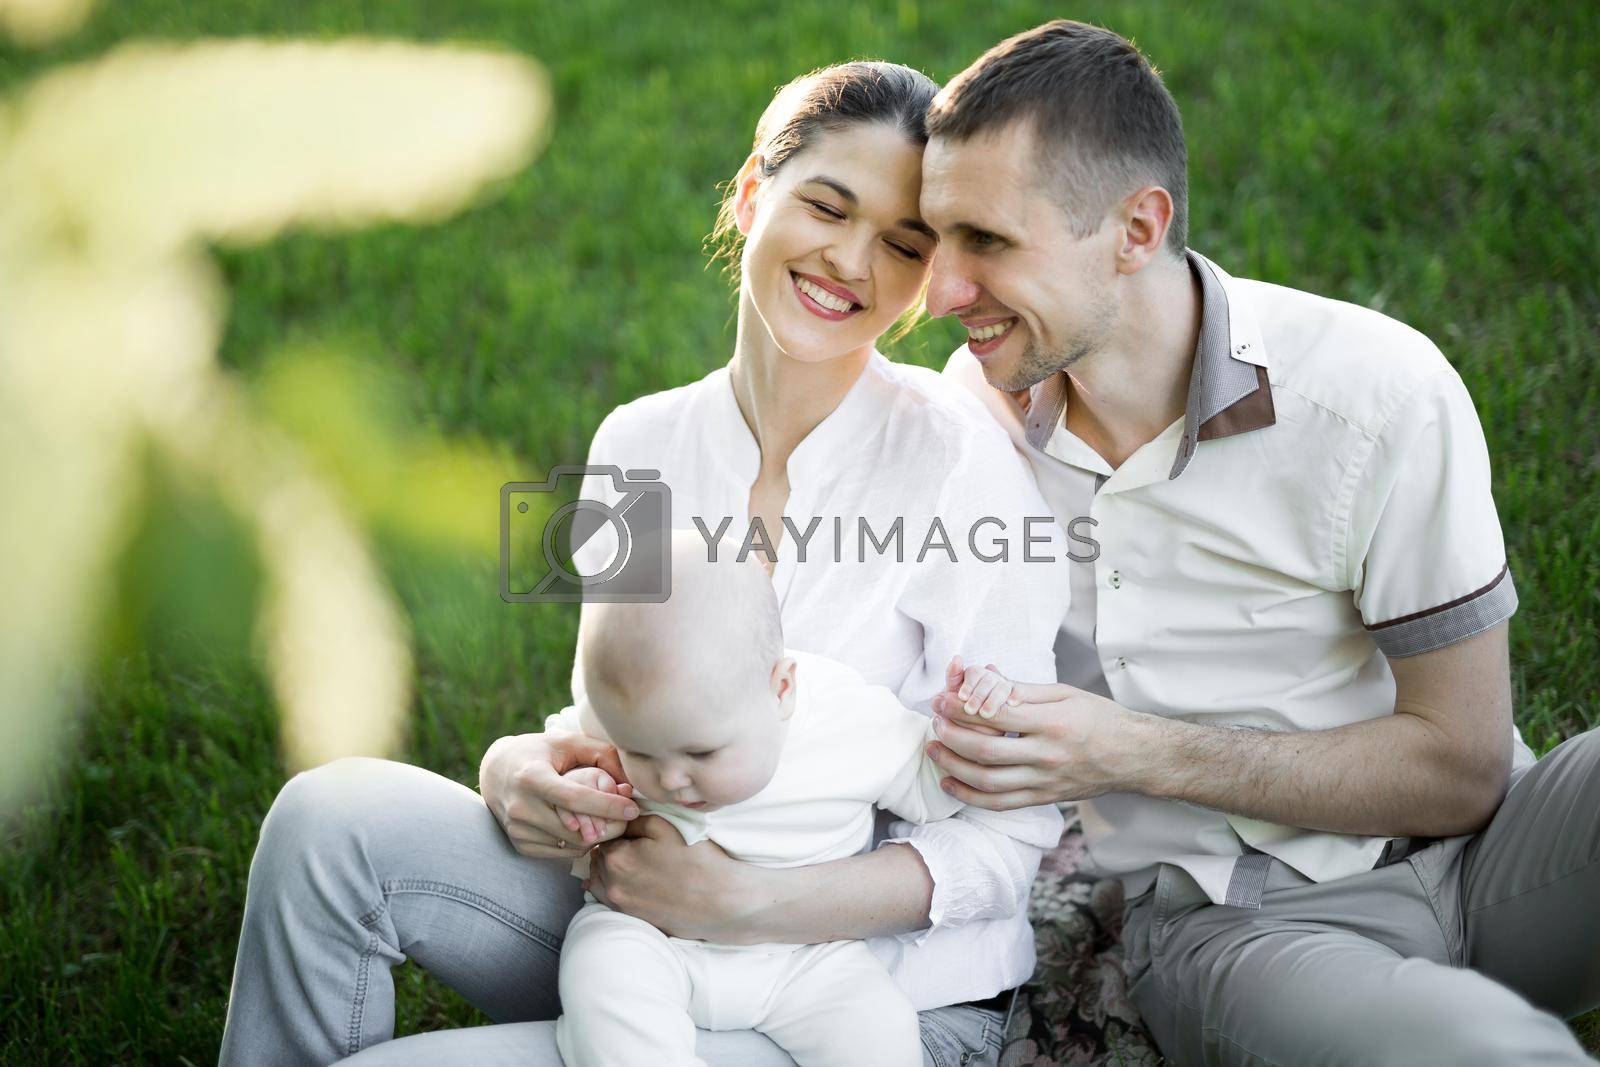 Portrait Beautiful Mother, Father And Baby outdoors. Happy family on a summer meadow